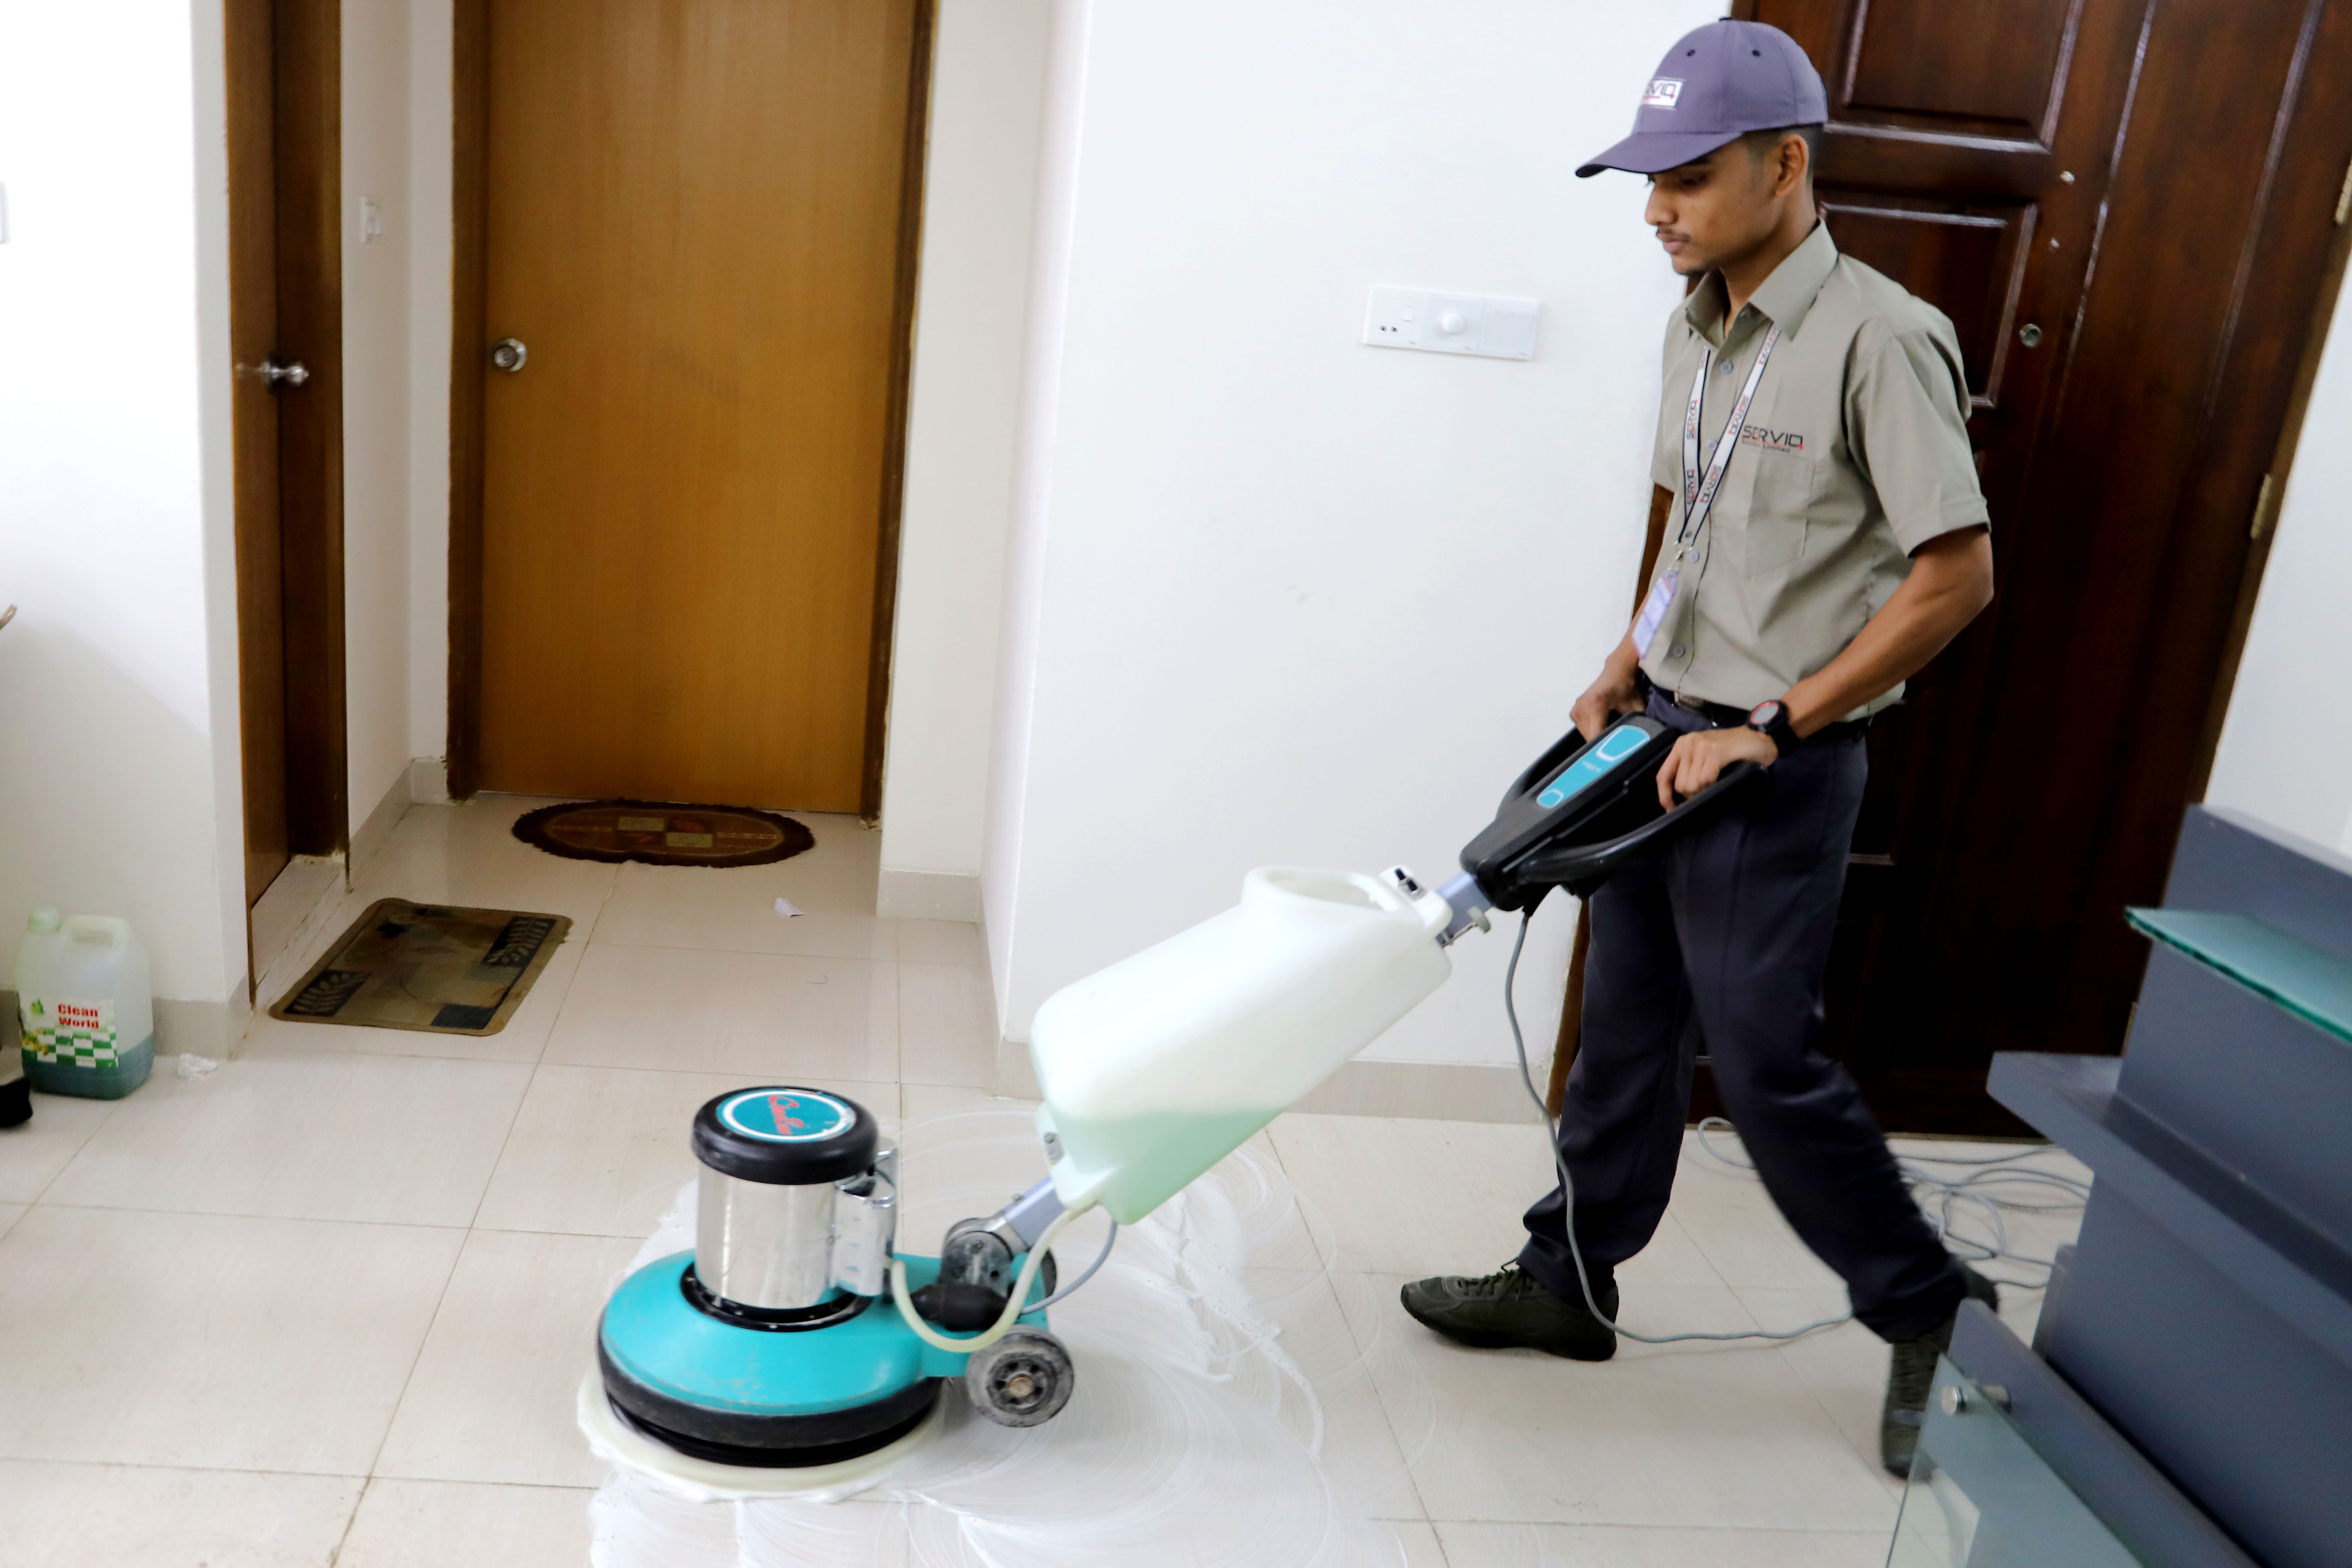 Floor Cleaning Service